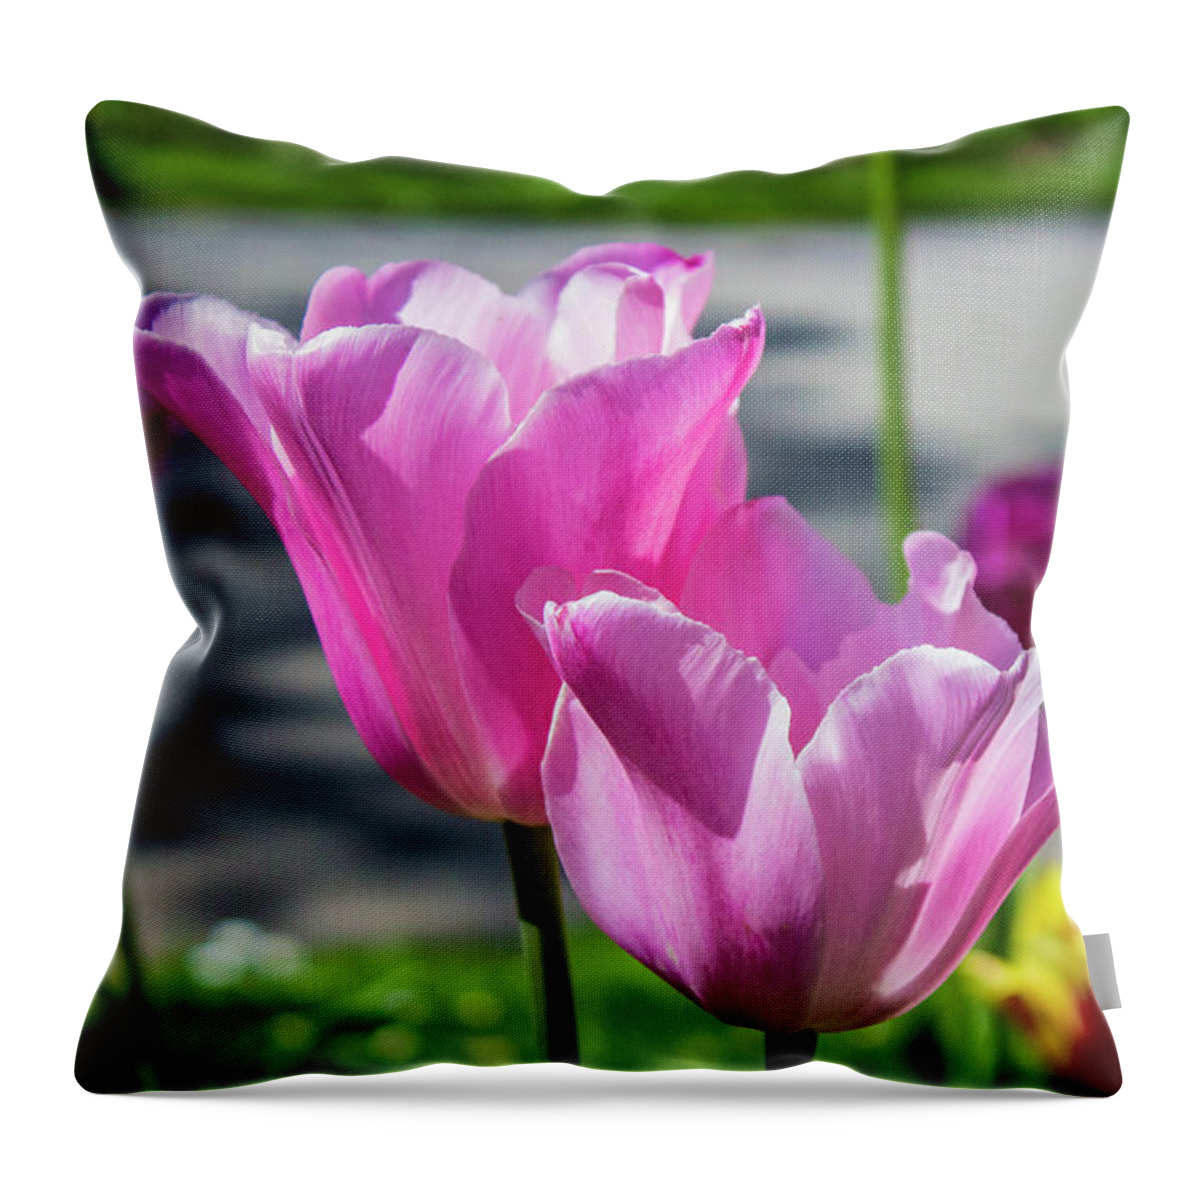 Tulip Throw Pillow featuring the photograph Tulips #1 by Doc Braham